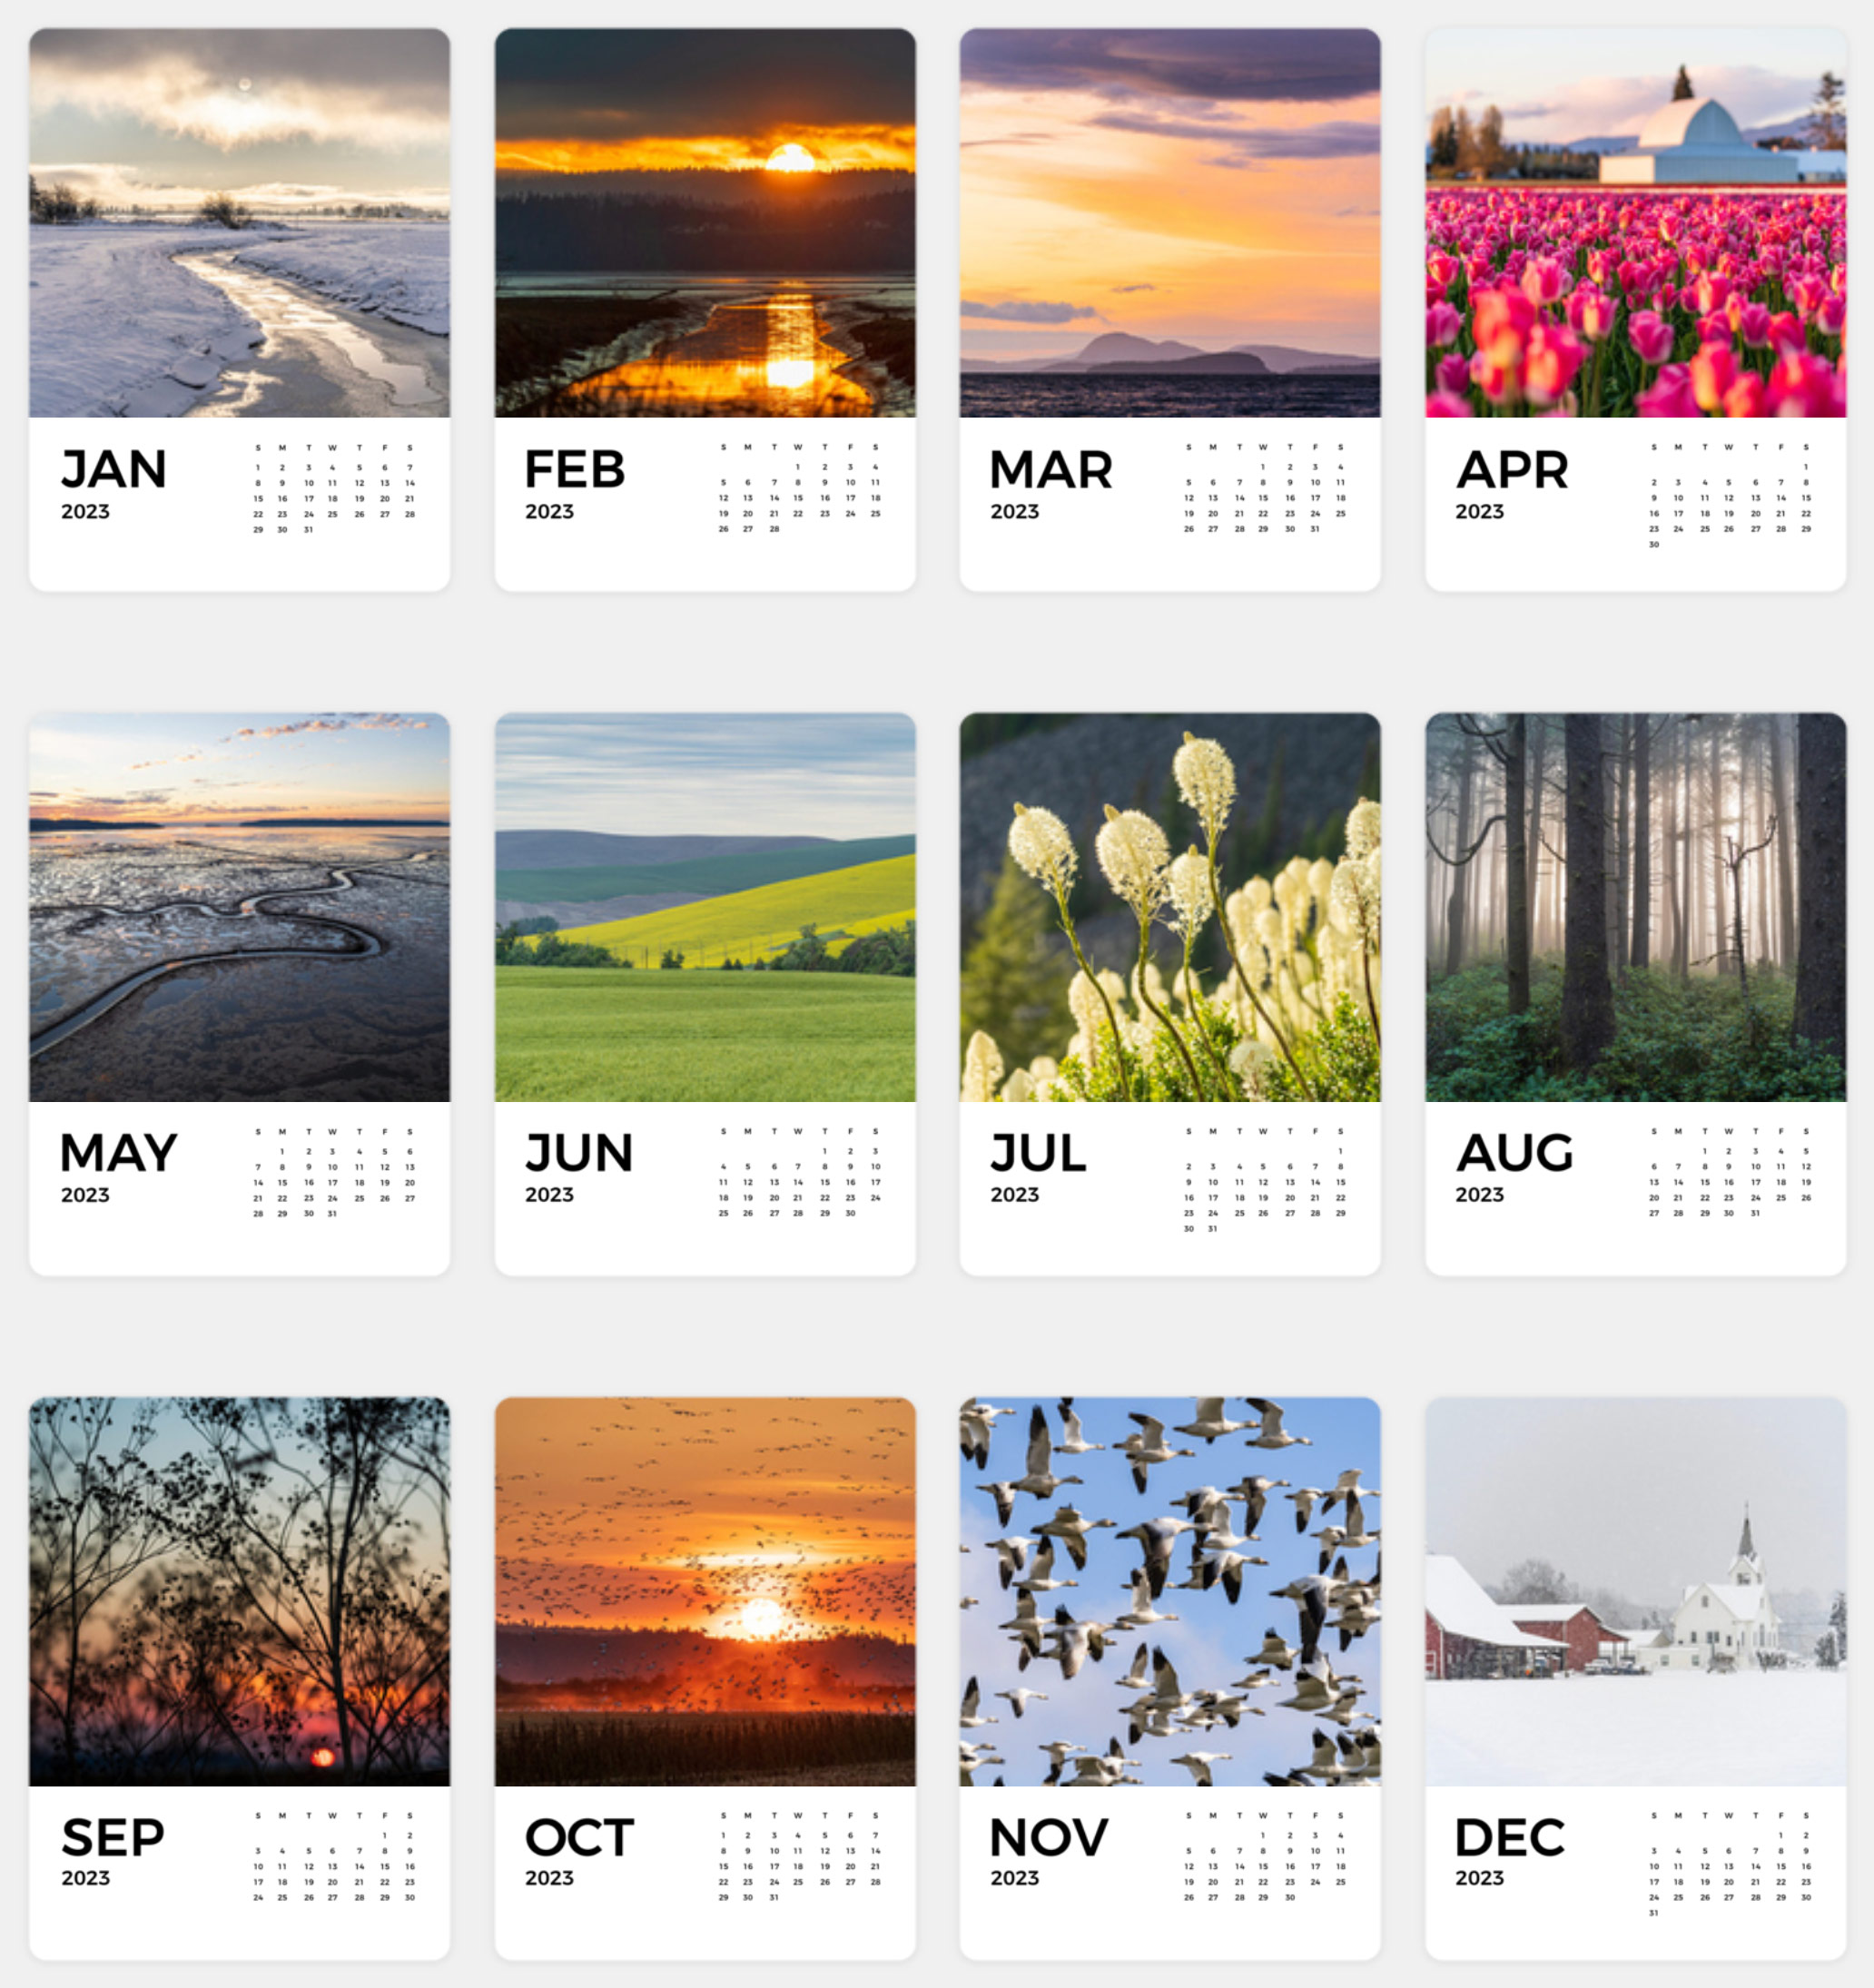 Grid of 12 months of images for 2023 calendar